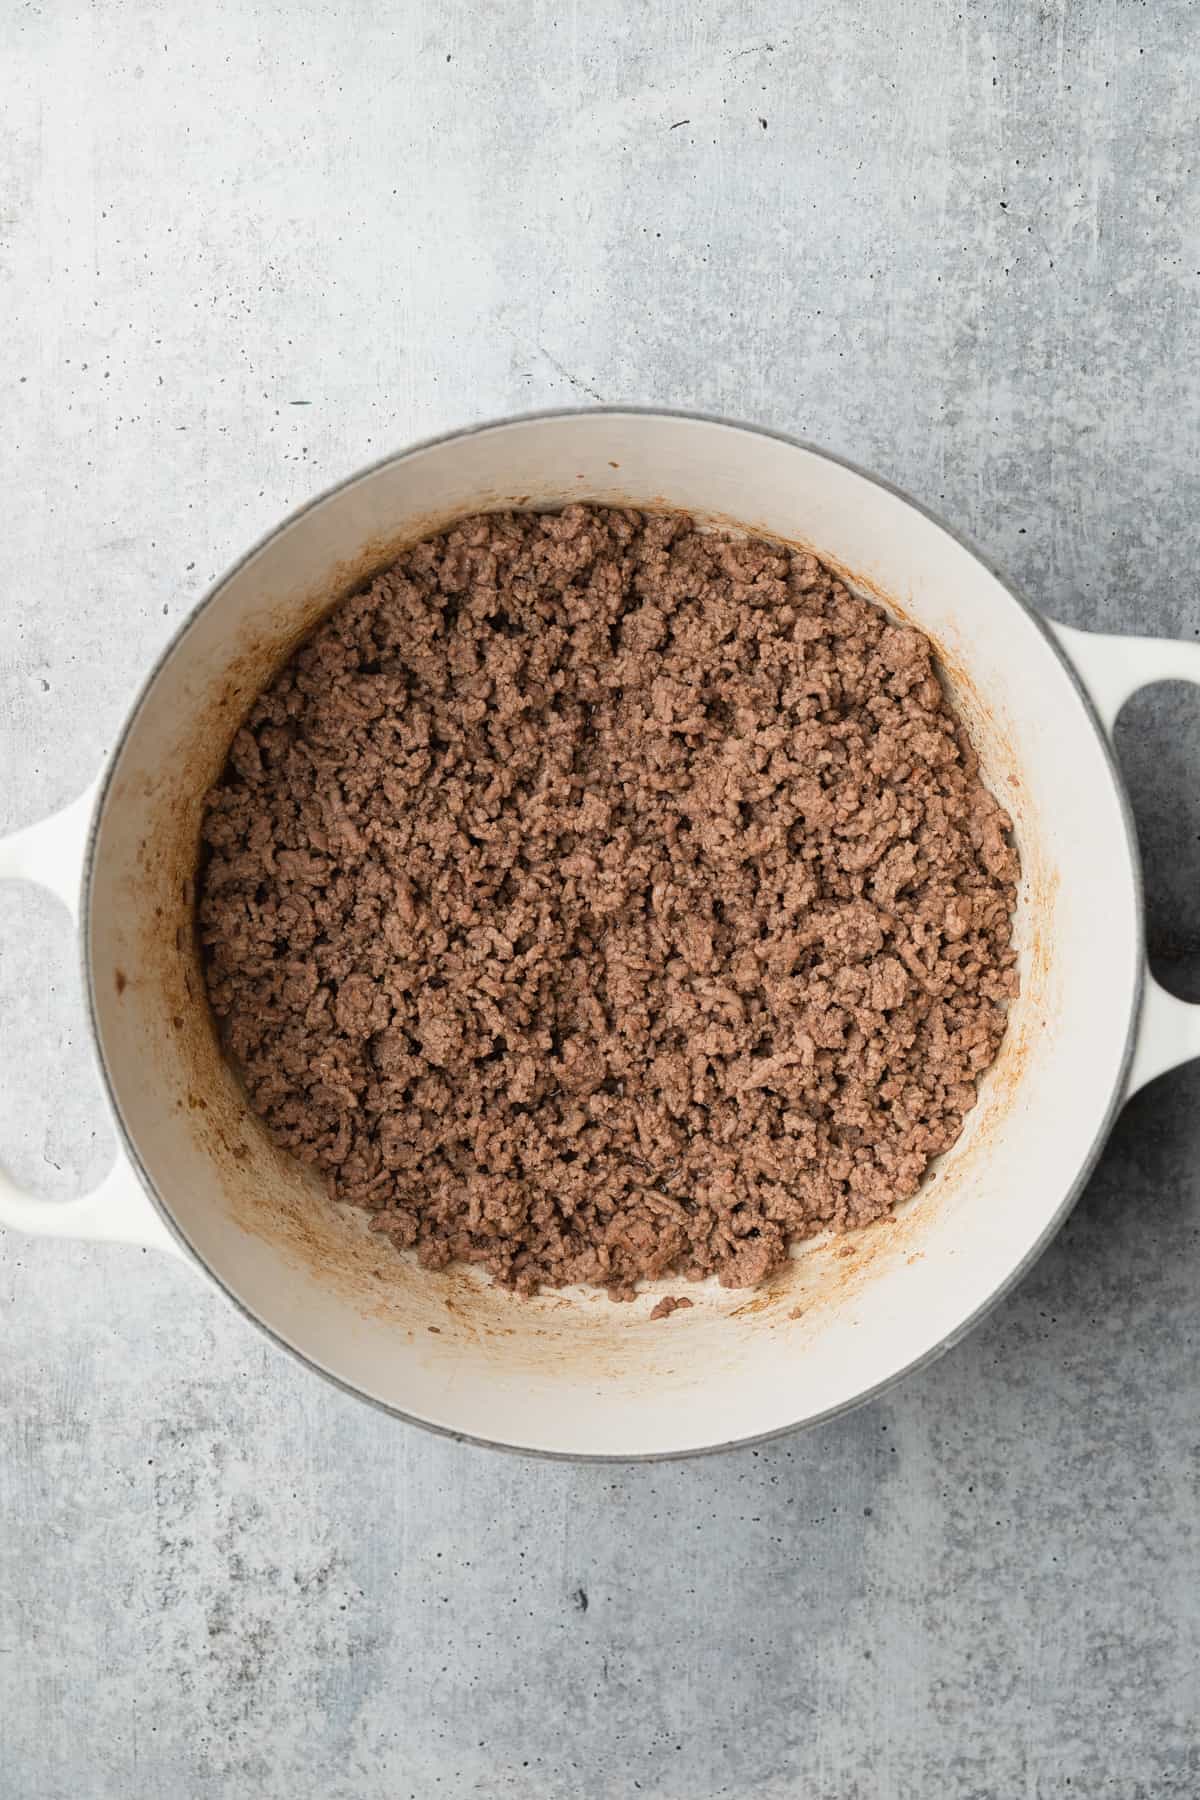 Browning ground beef in a large pot.